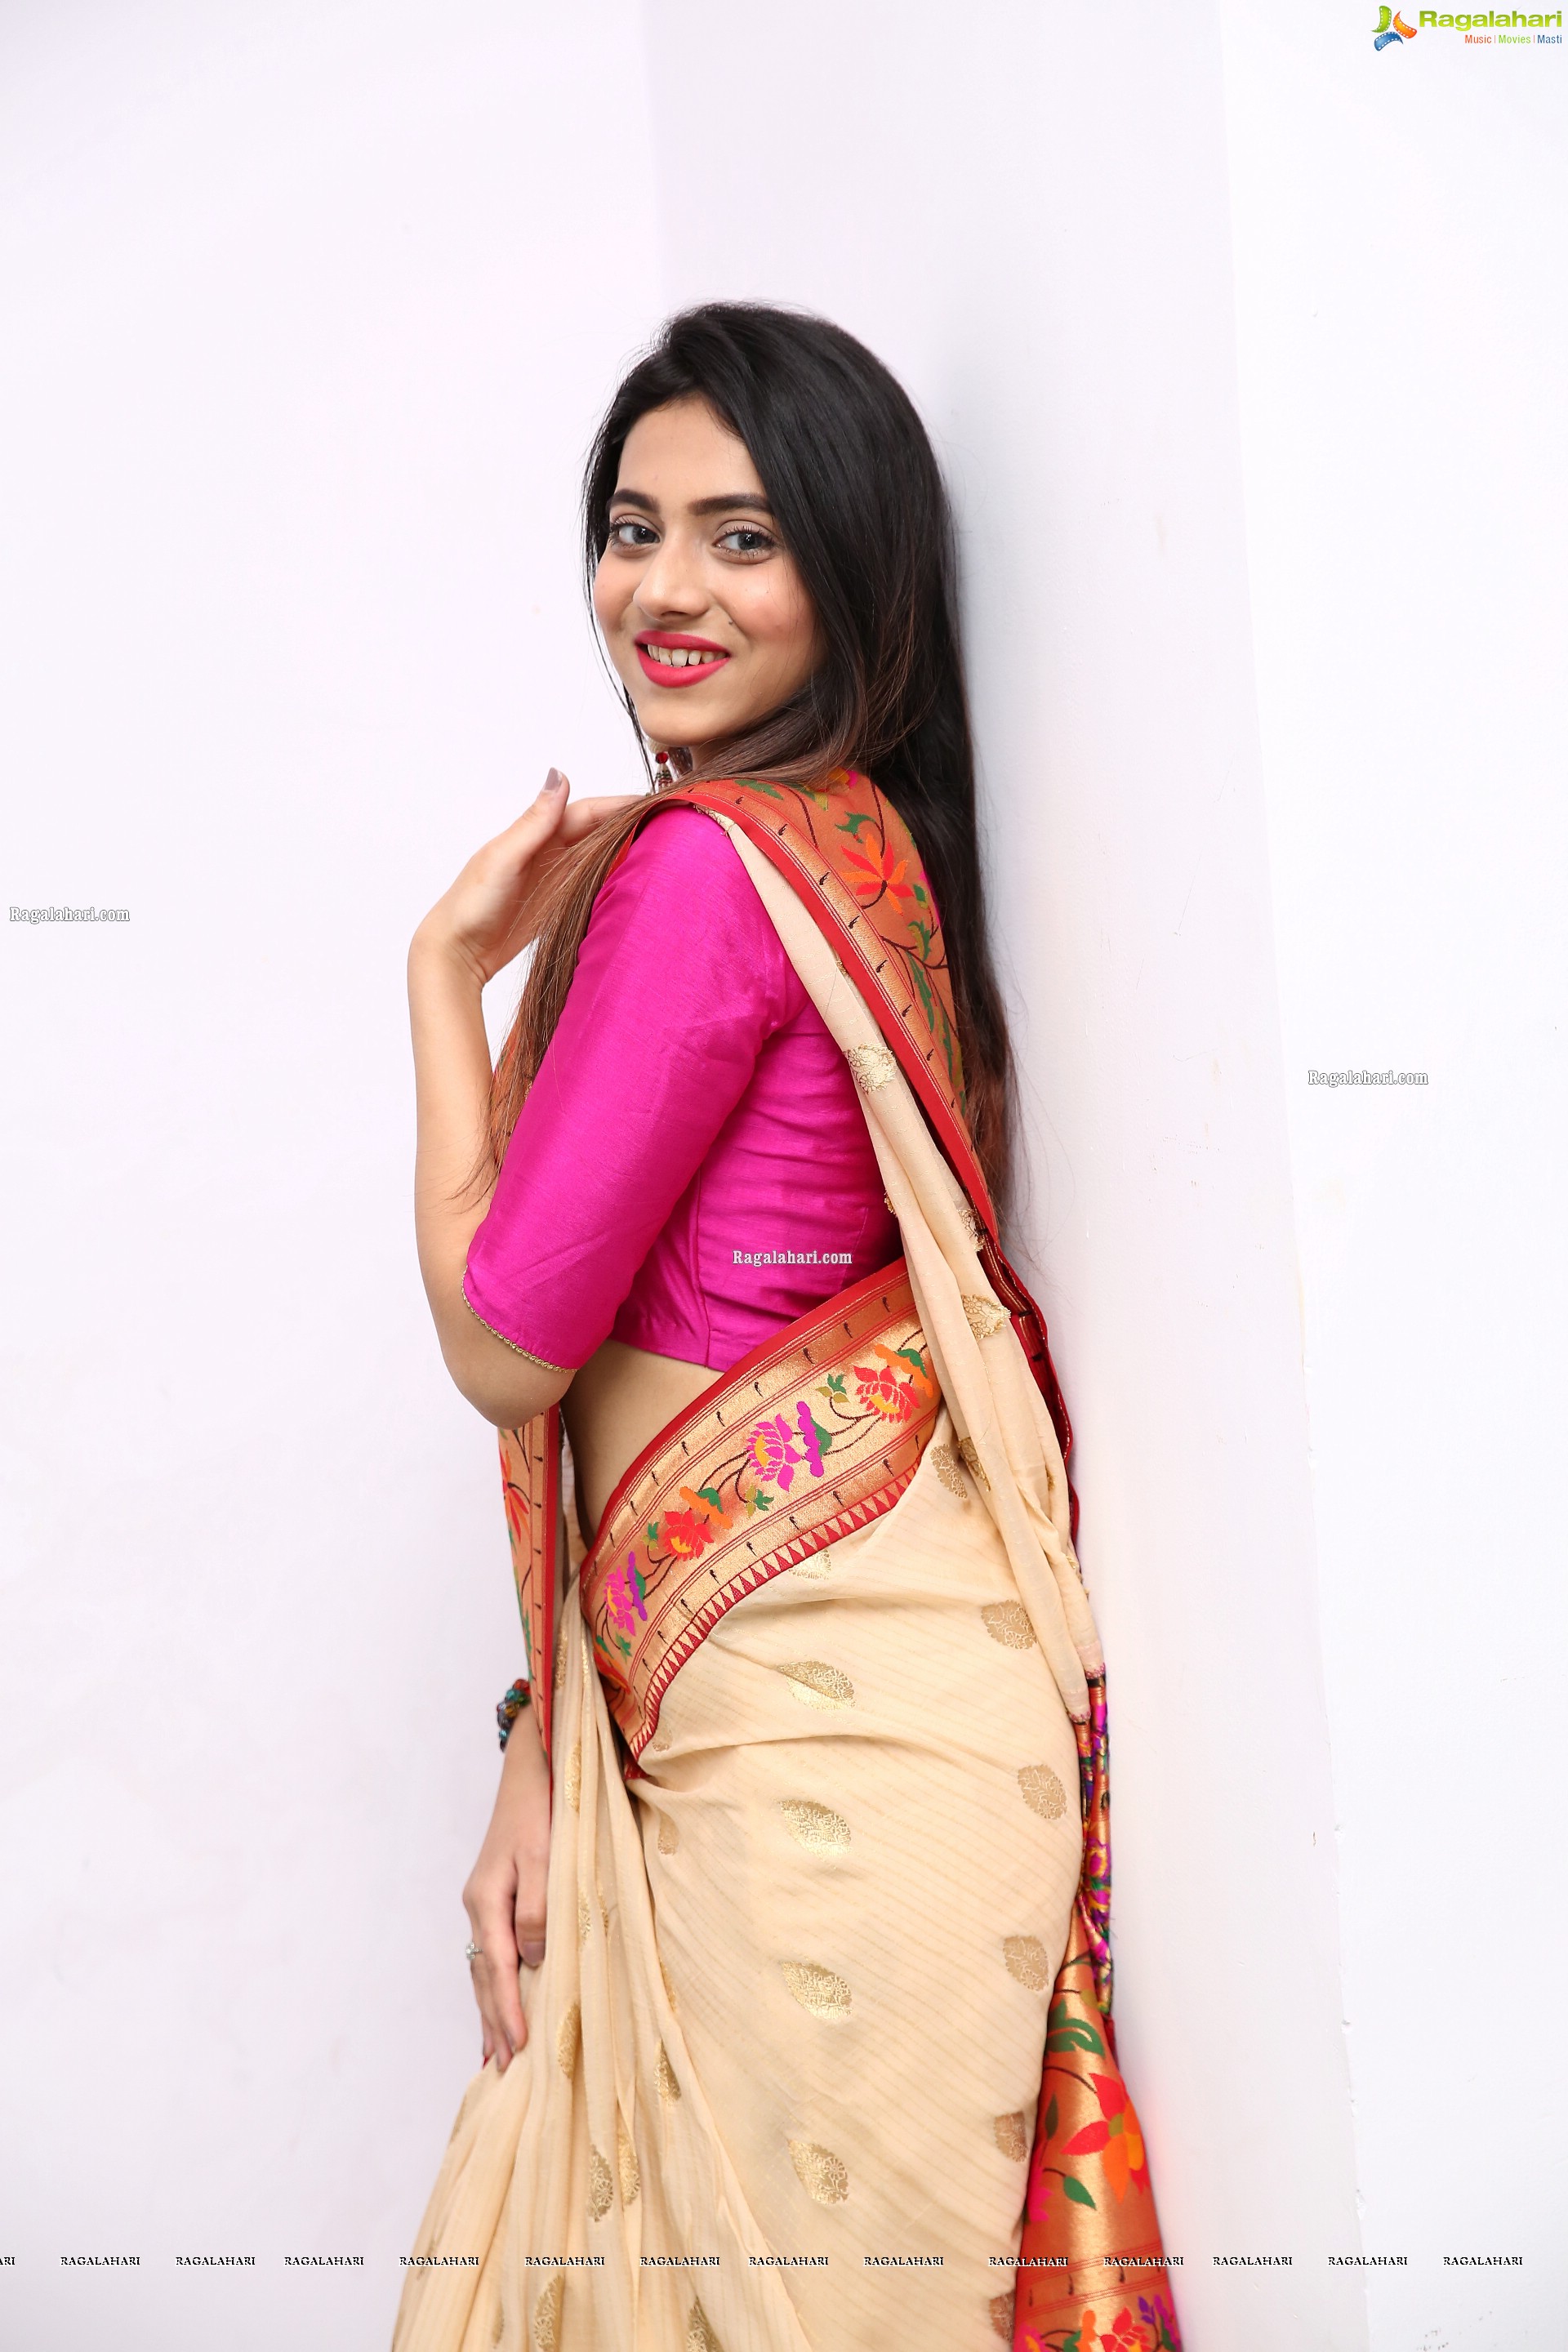 Dimple Thakur in Traditional Saree, HD Photo Gallery